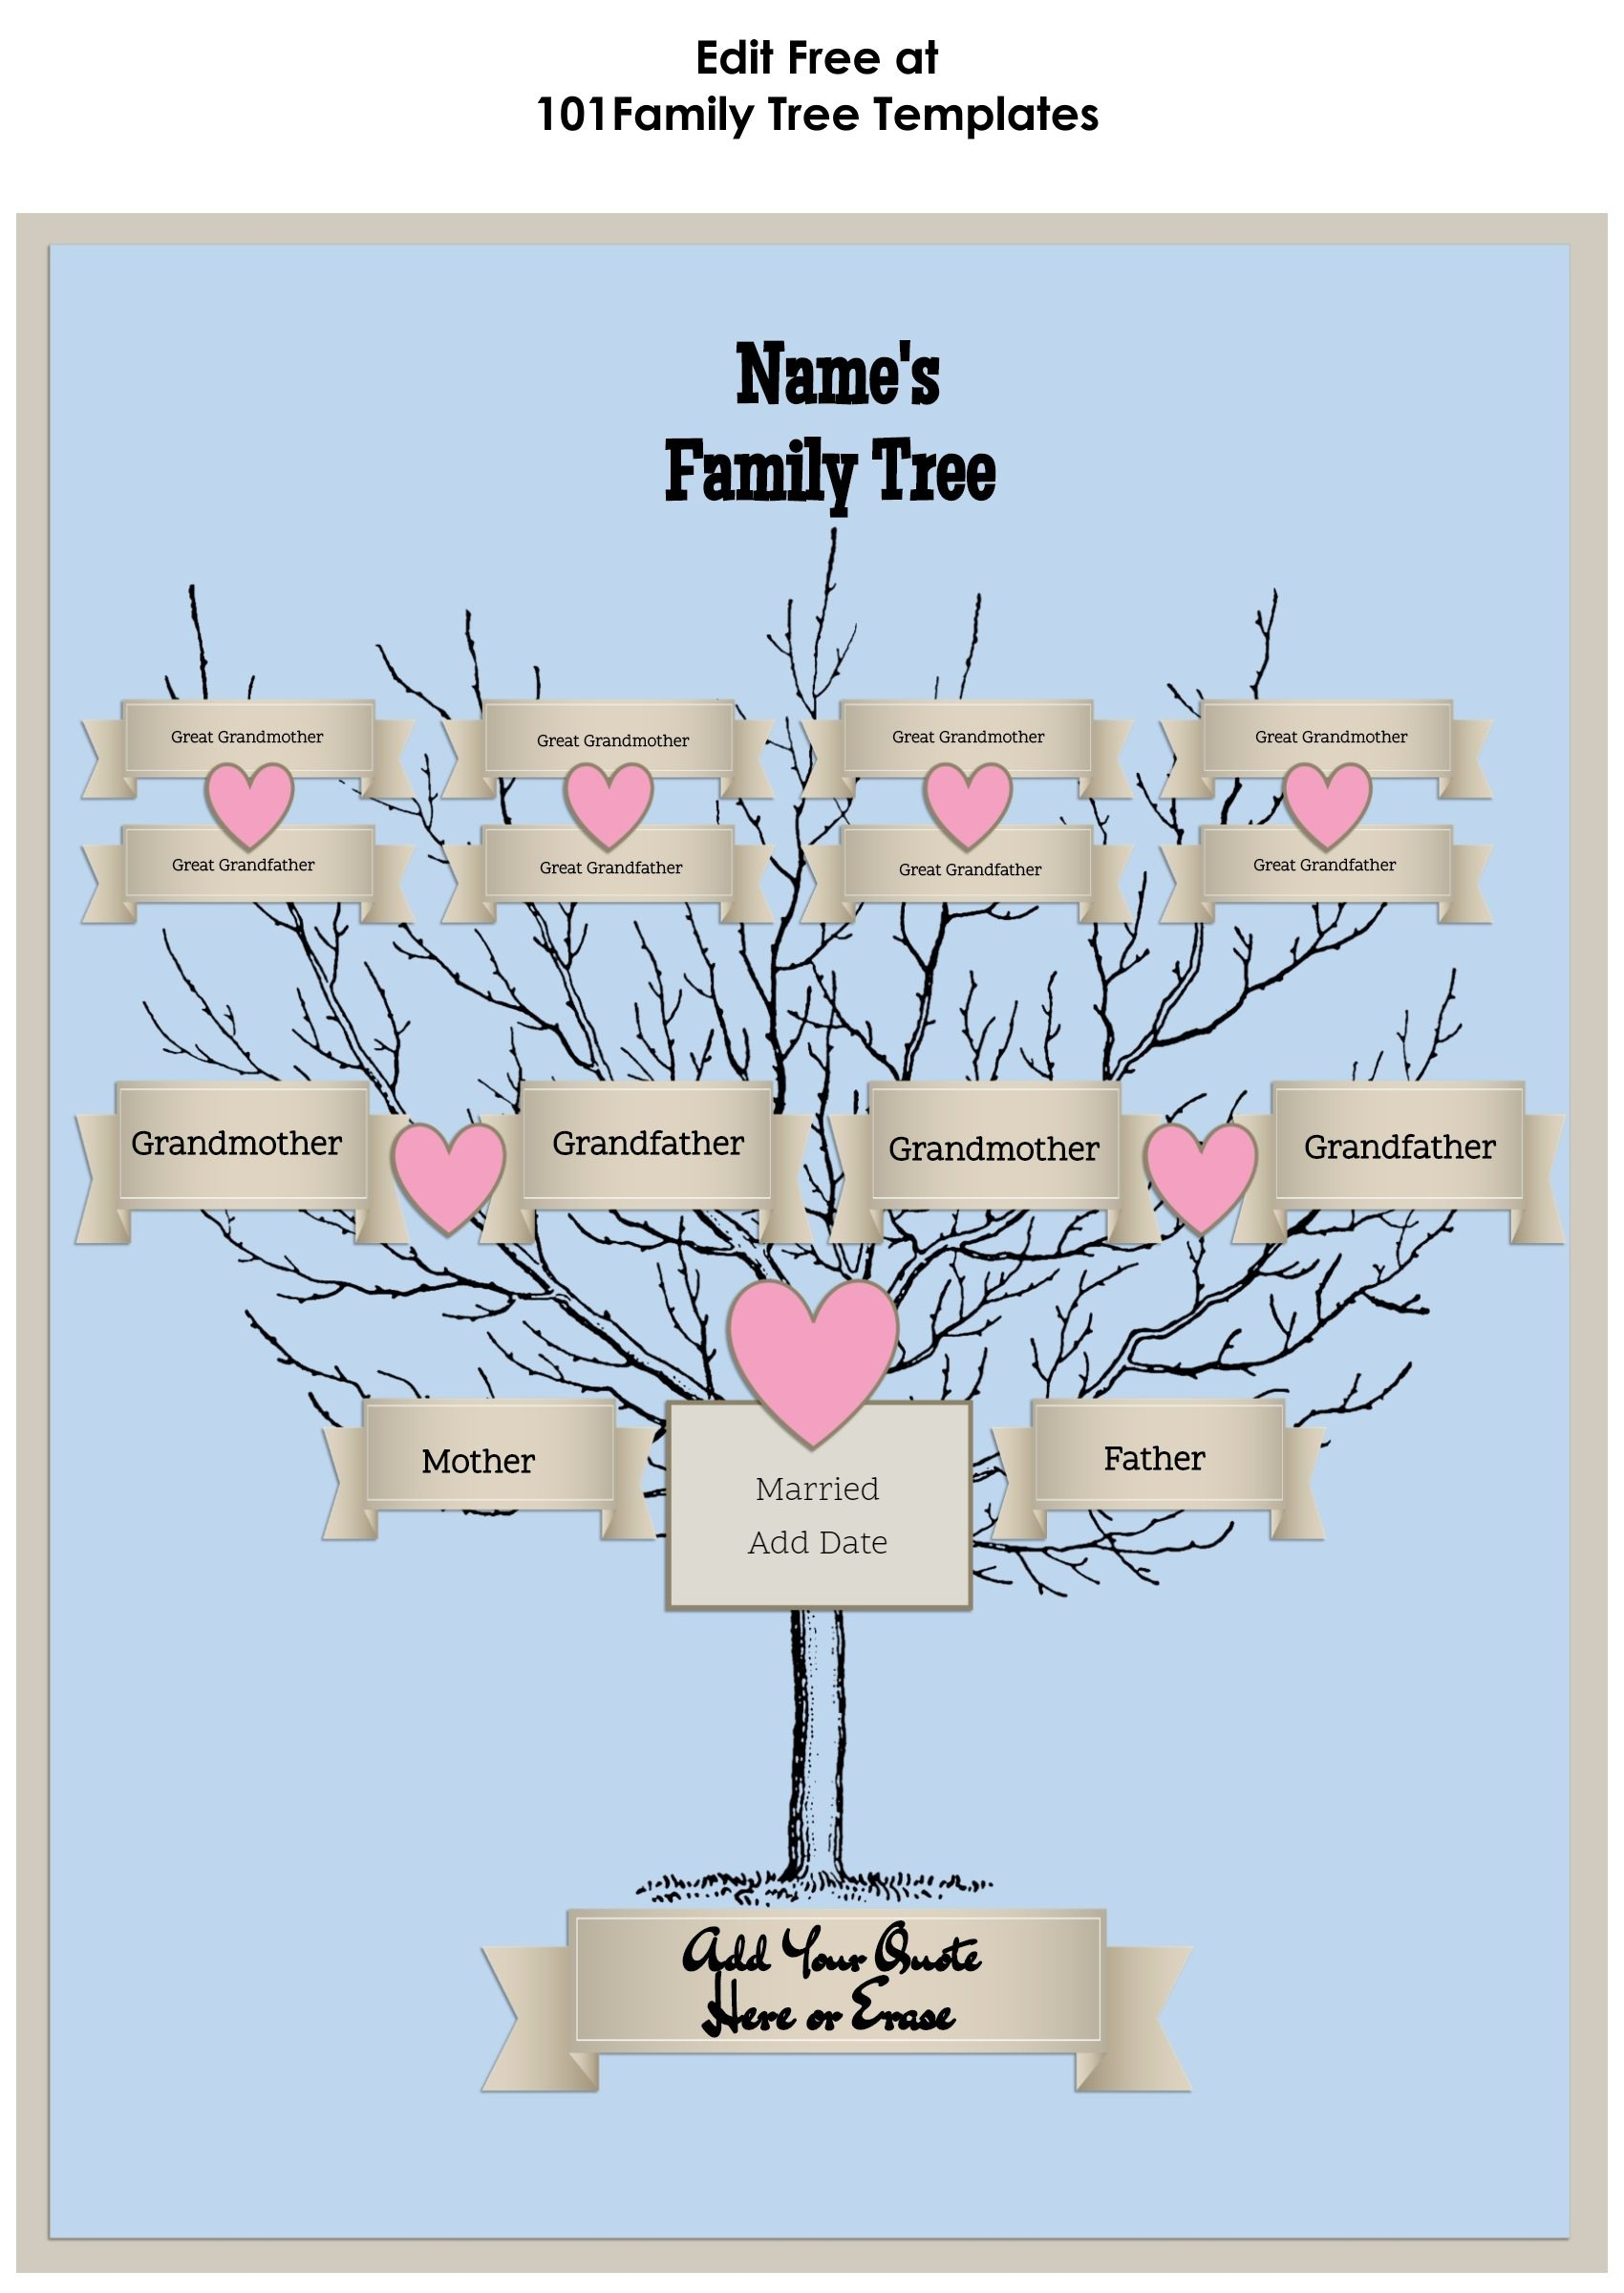 3 Generation Family Tree Generator | All Templates Are Free To Customize - Family Tree Maker Free Printable